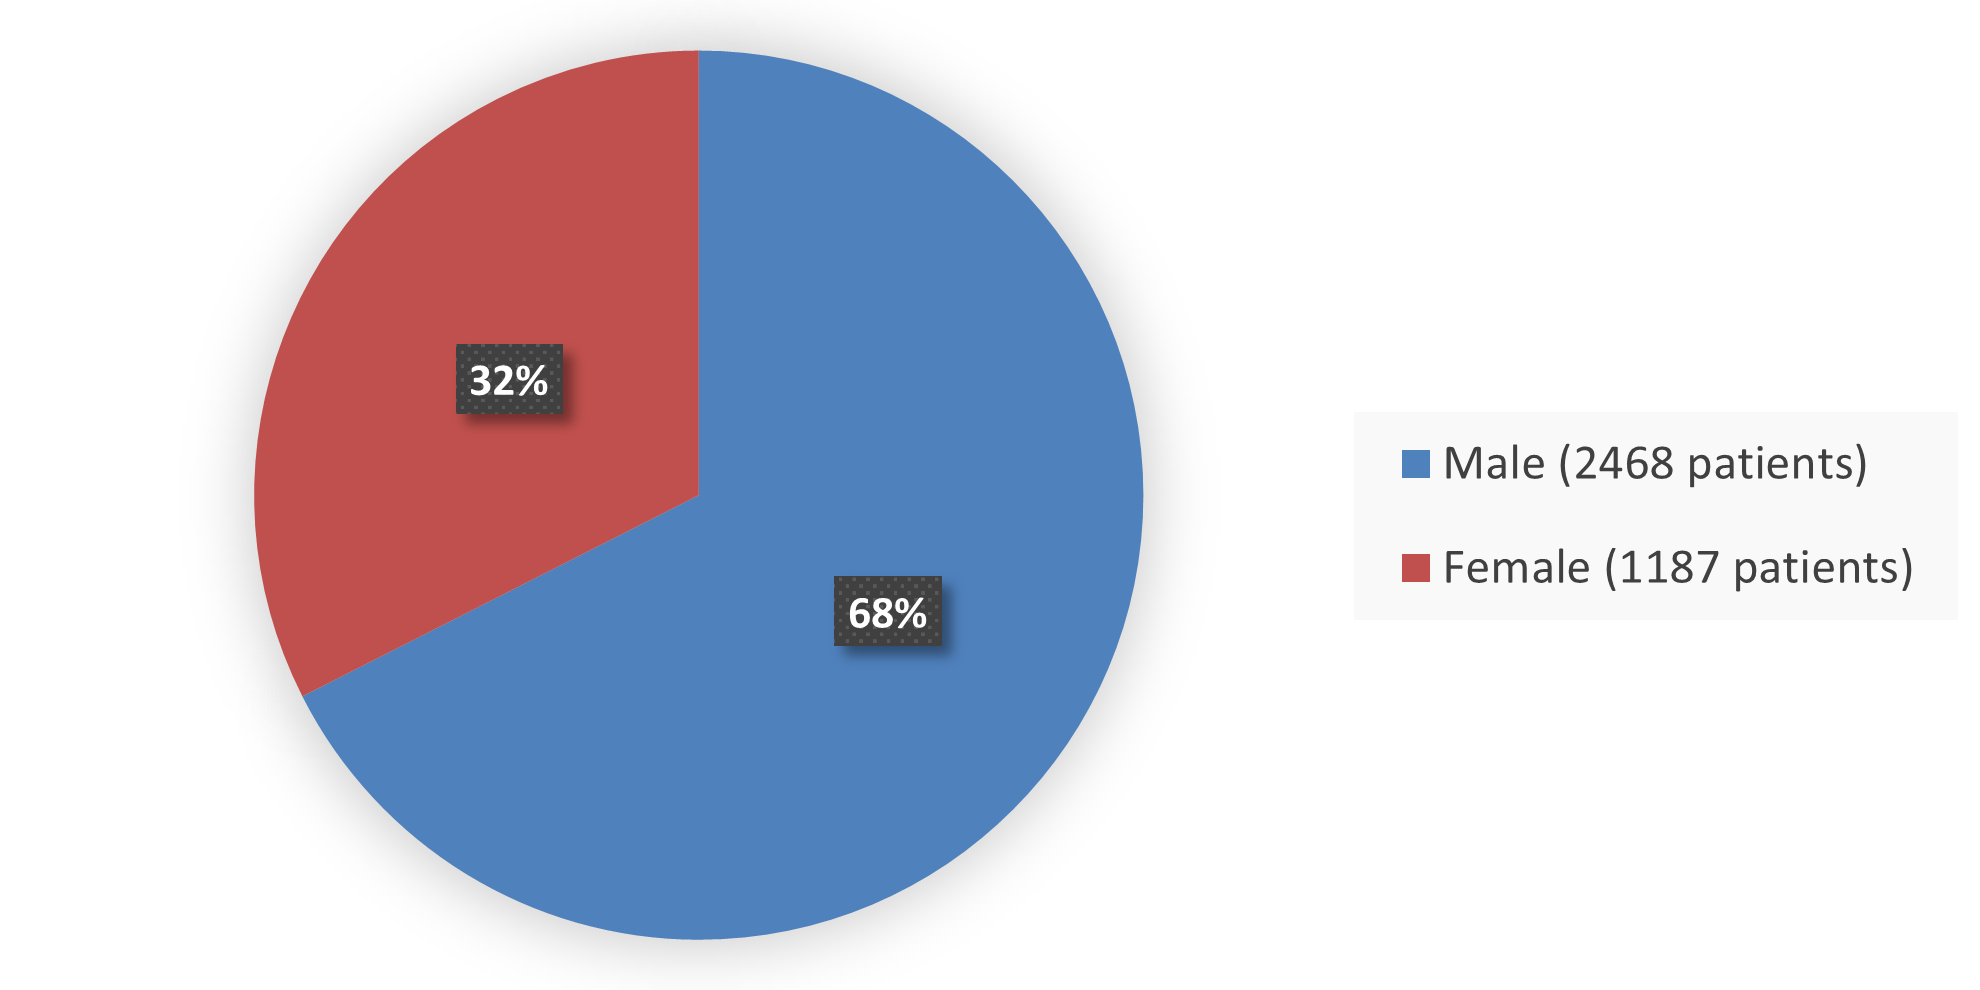 Pie chart summarizing how many male and female patients were in the clinical trial. In total, 2,468 (%) male patients and 1,187 (32%) female patients participated in the clinical trial.